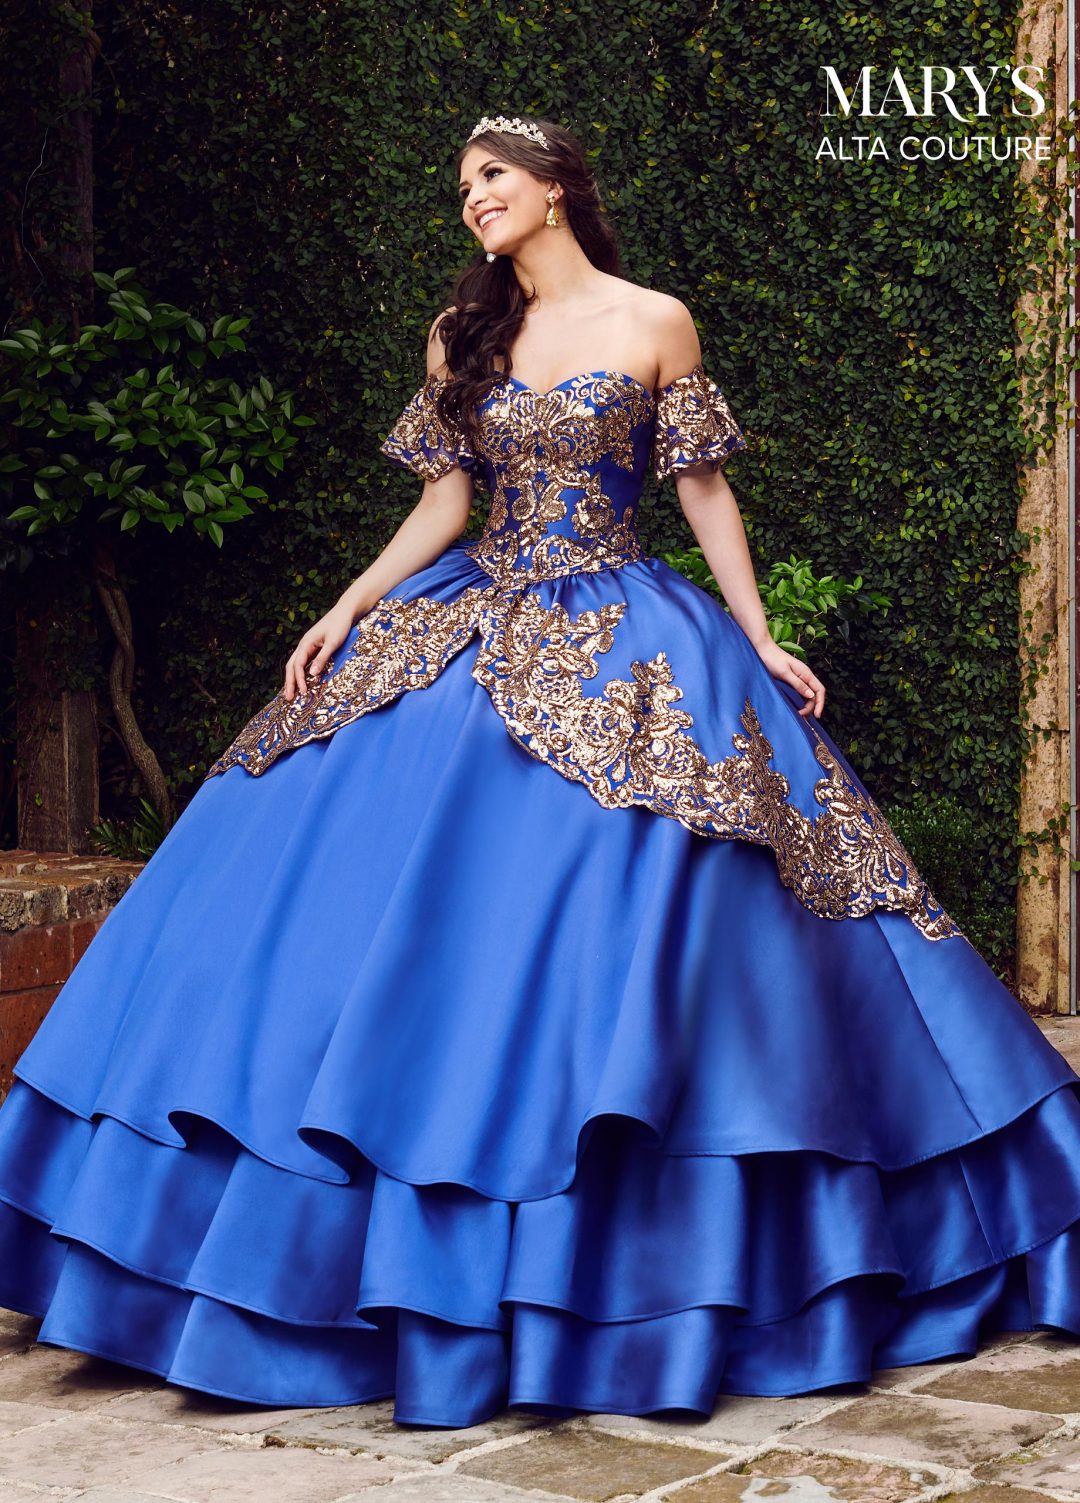 Quinceanera Couture Dresses In Royal/Gold, Emerald Green/Gold, Or